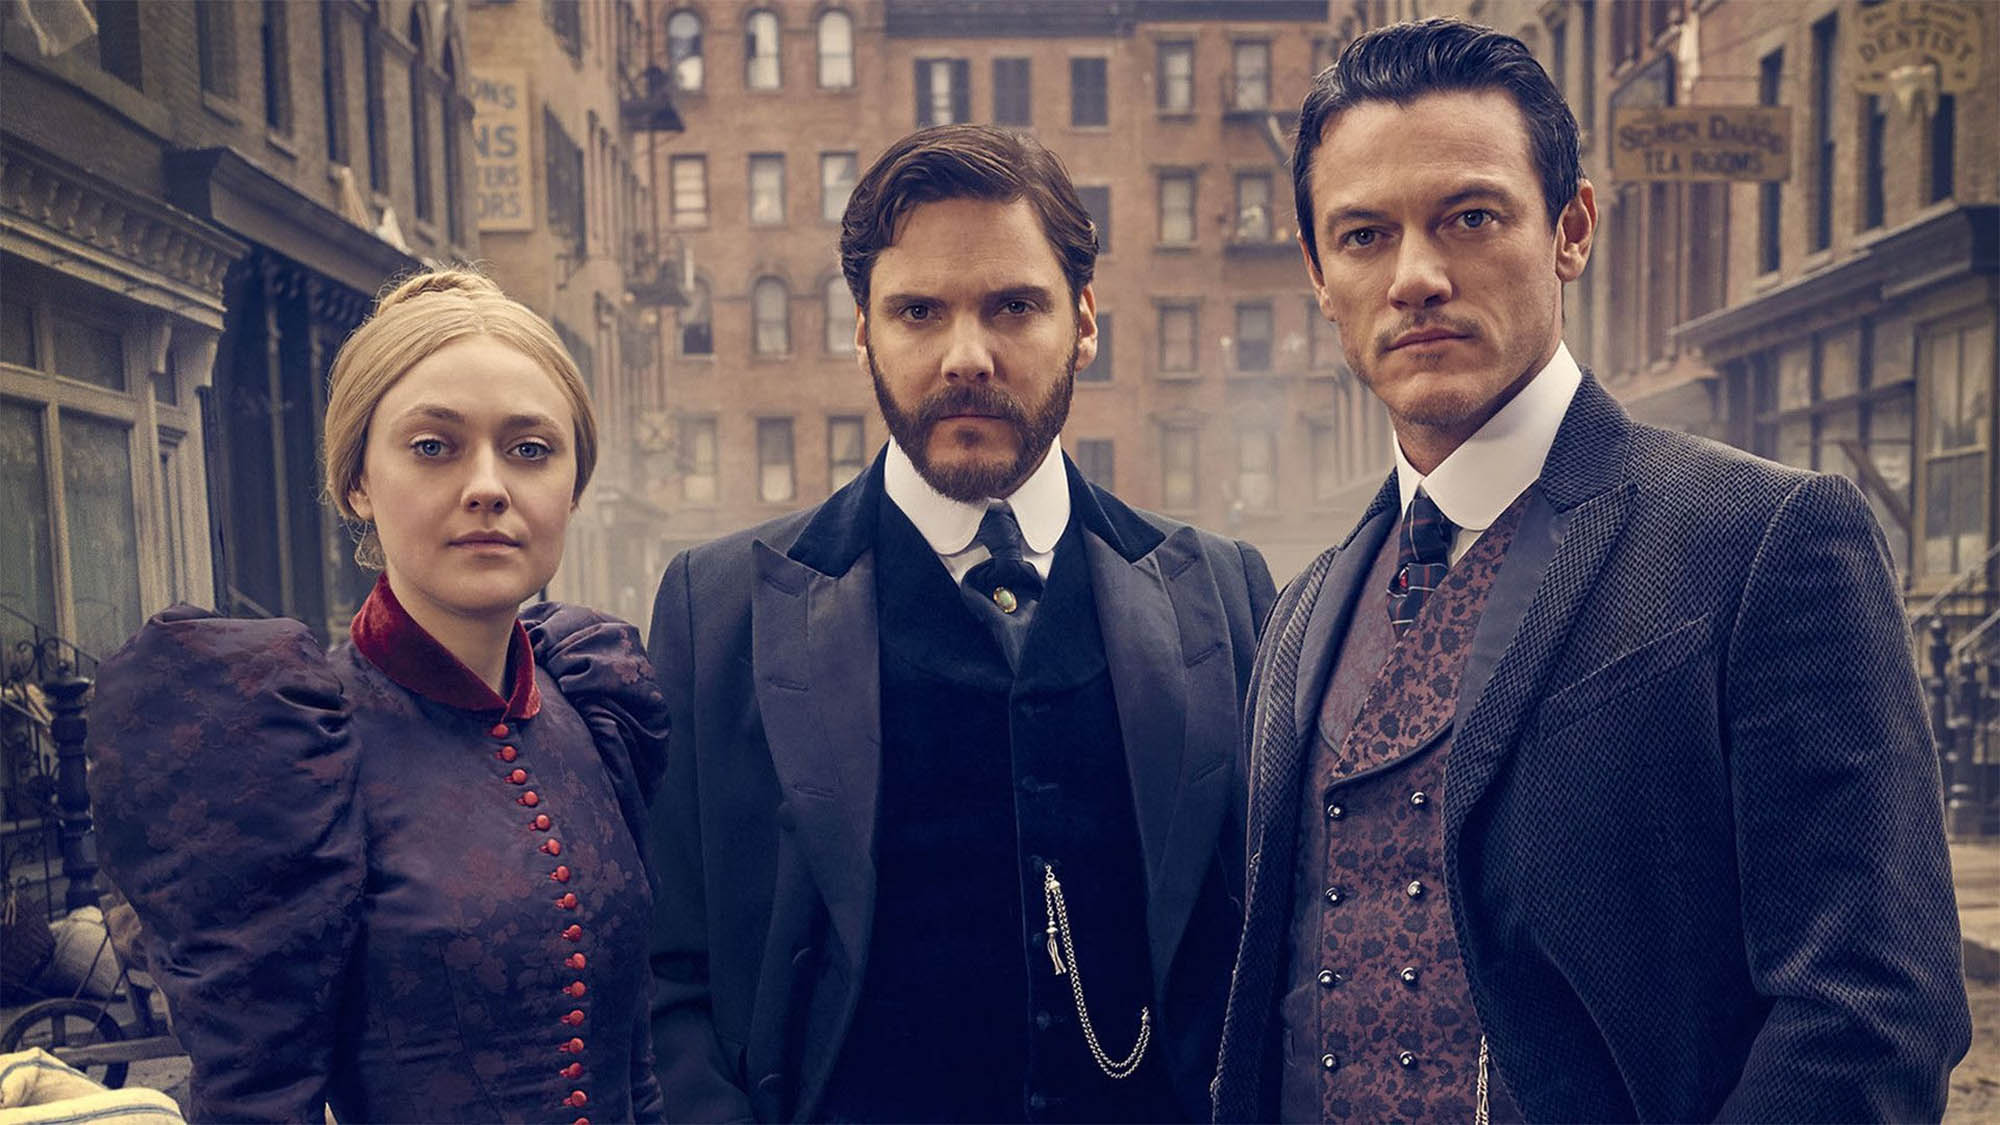 'The Alienist' is getting a sequel season. Here are nine essential TV shows that we think fans of the period crime drama will absolutely love.